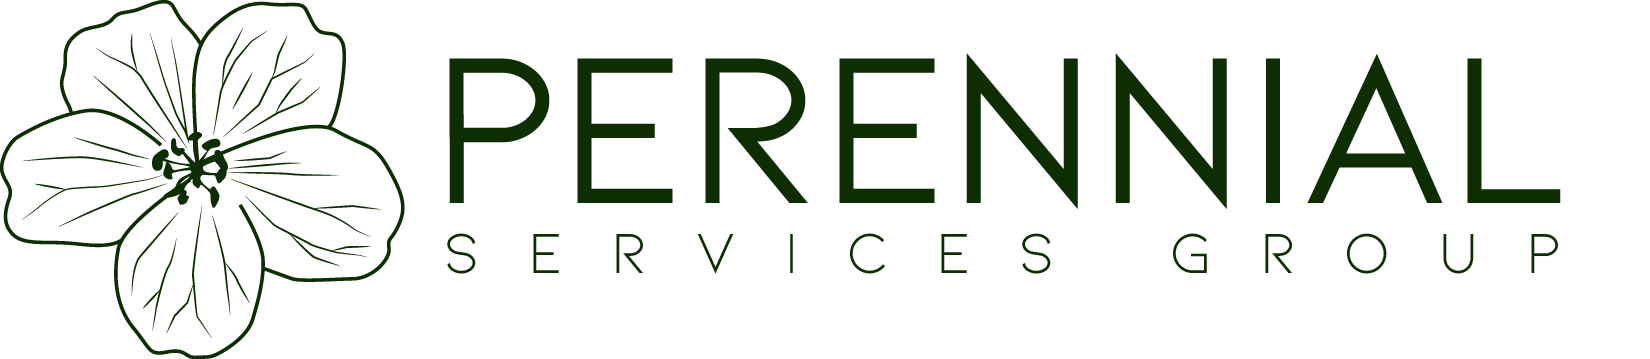 Perennial Services Group 